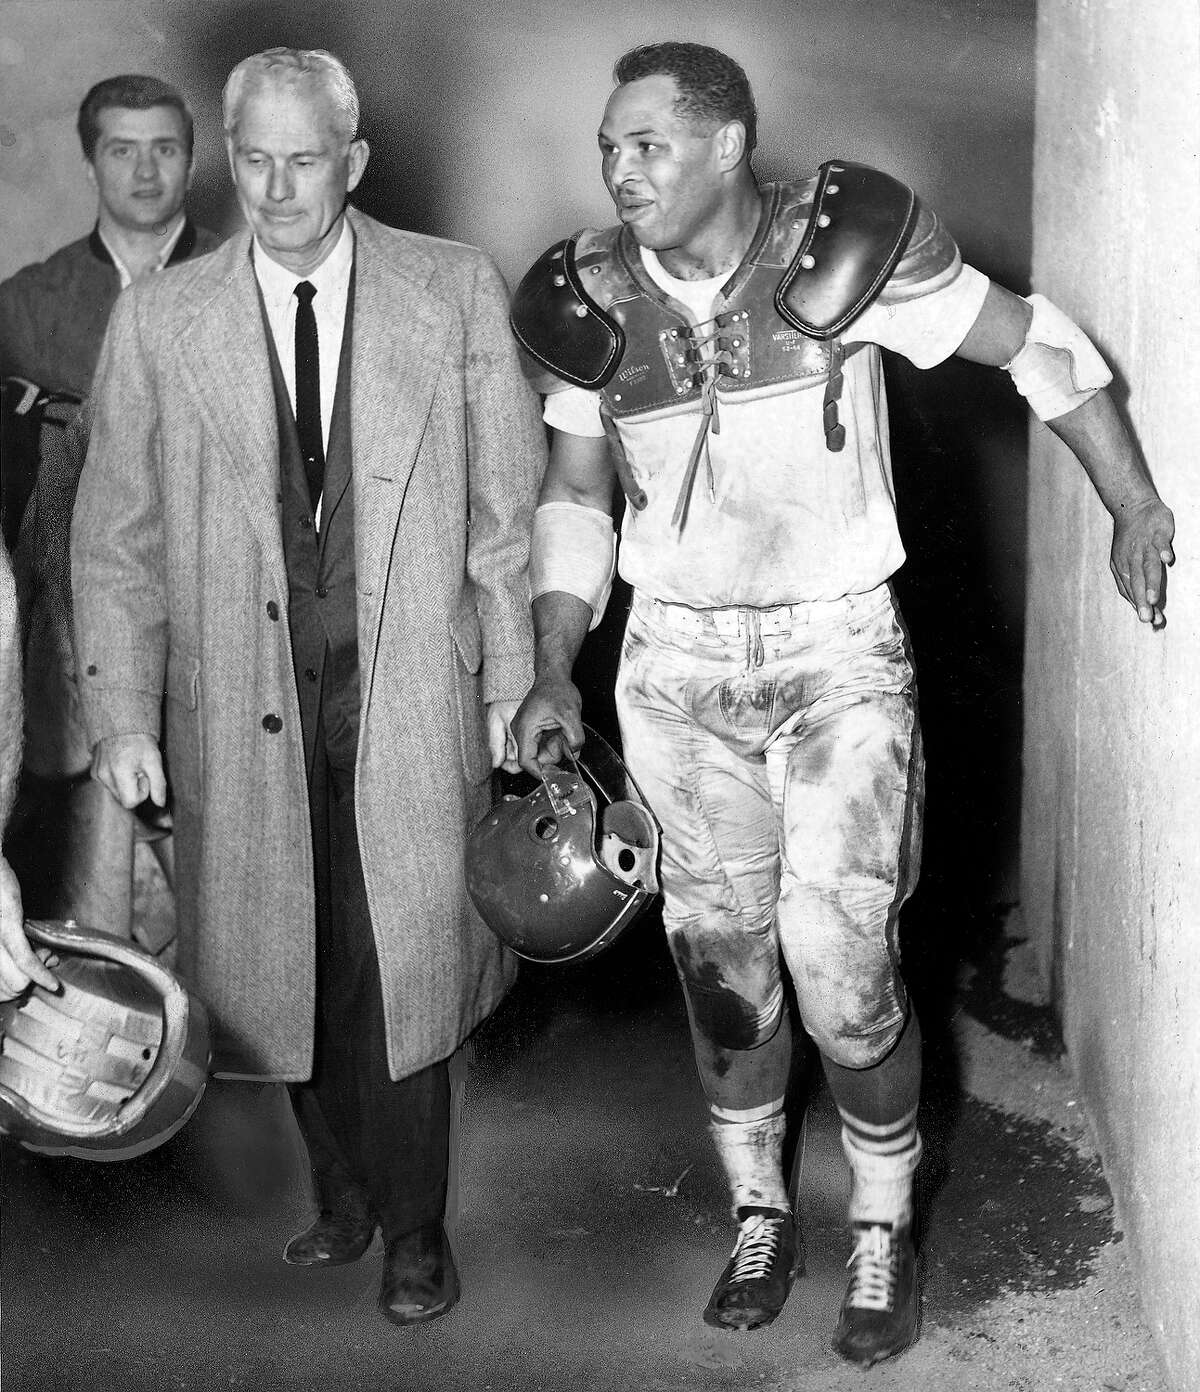 Lawrence "Buck" Shaw , seen here with Joe Perry, in 1954 was head coach of the 49ers from 1946 to 1954 and left the team with a 71-39-04 record. Shaw was the San Francisco 49ers' first head coach, his first NFL coaching job after leading Santa Clara University to two Sugar Bowl wins and coaching at Cal for a year.